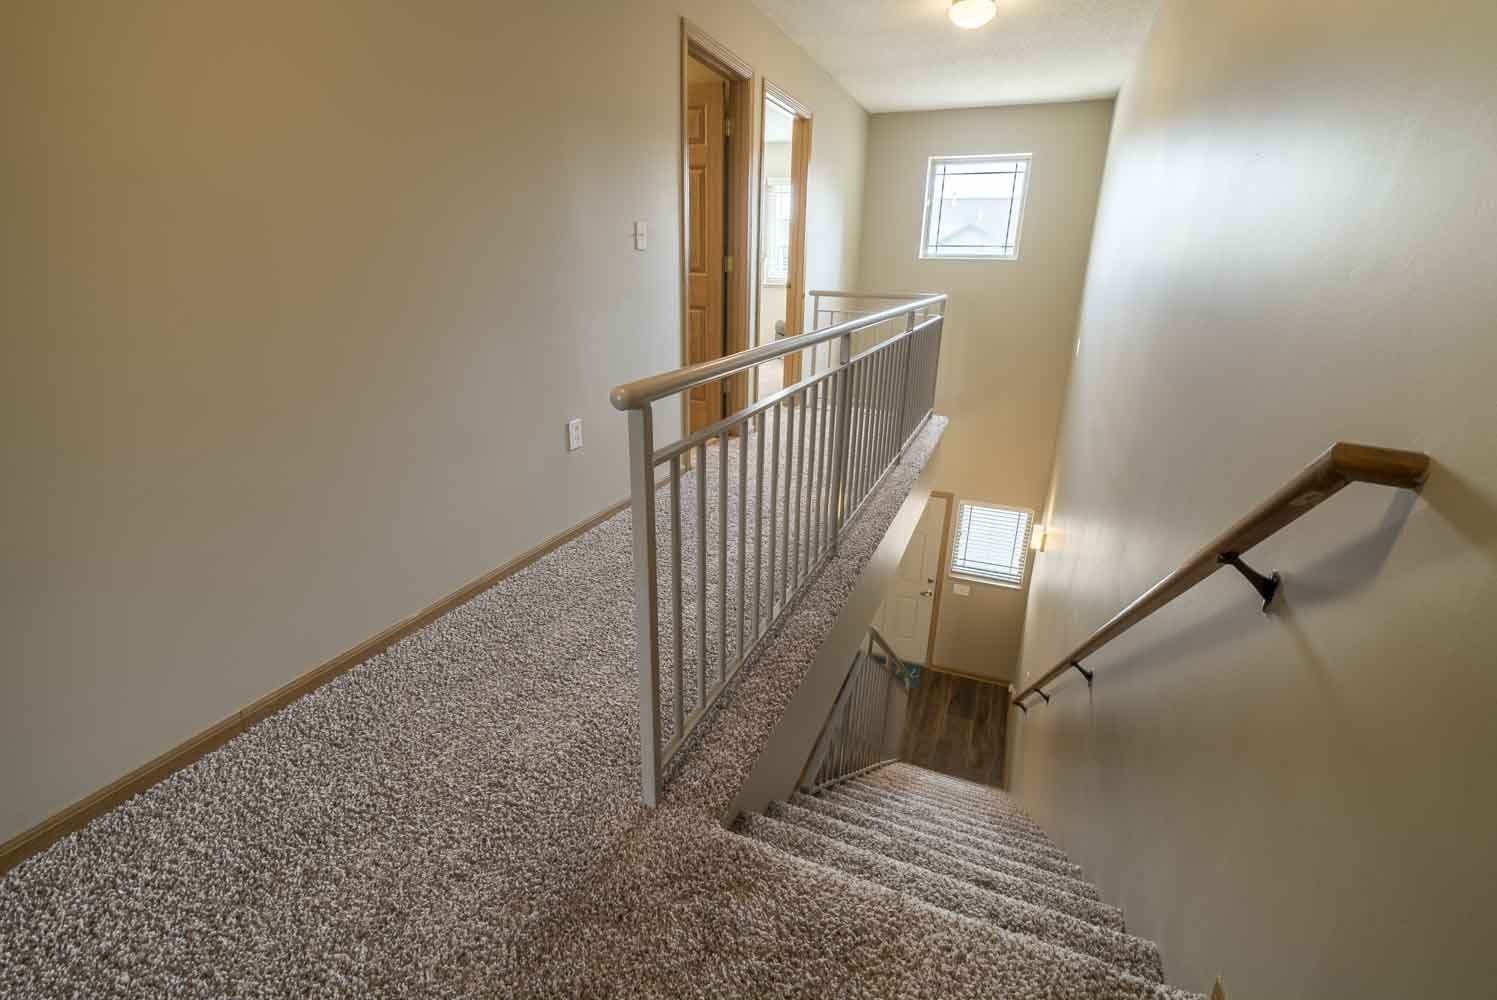 Stairwell to upstairs in a two-bedroom townhome at Southwind Villas in southwest Omaha in La Vista, NE, 68128